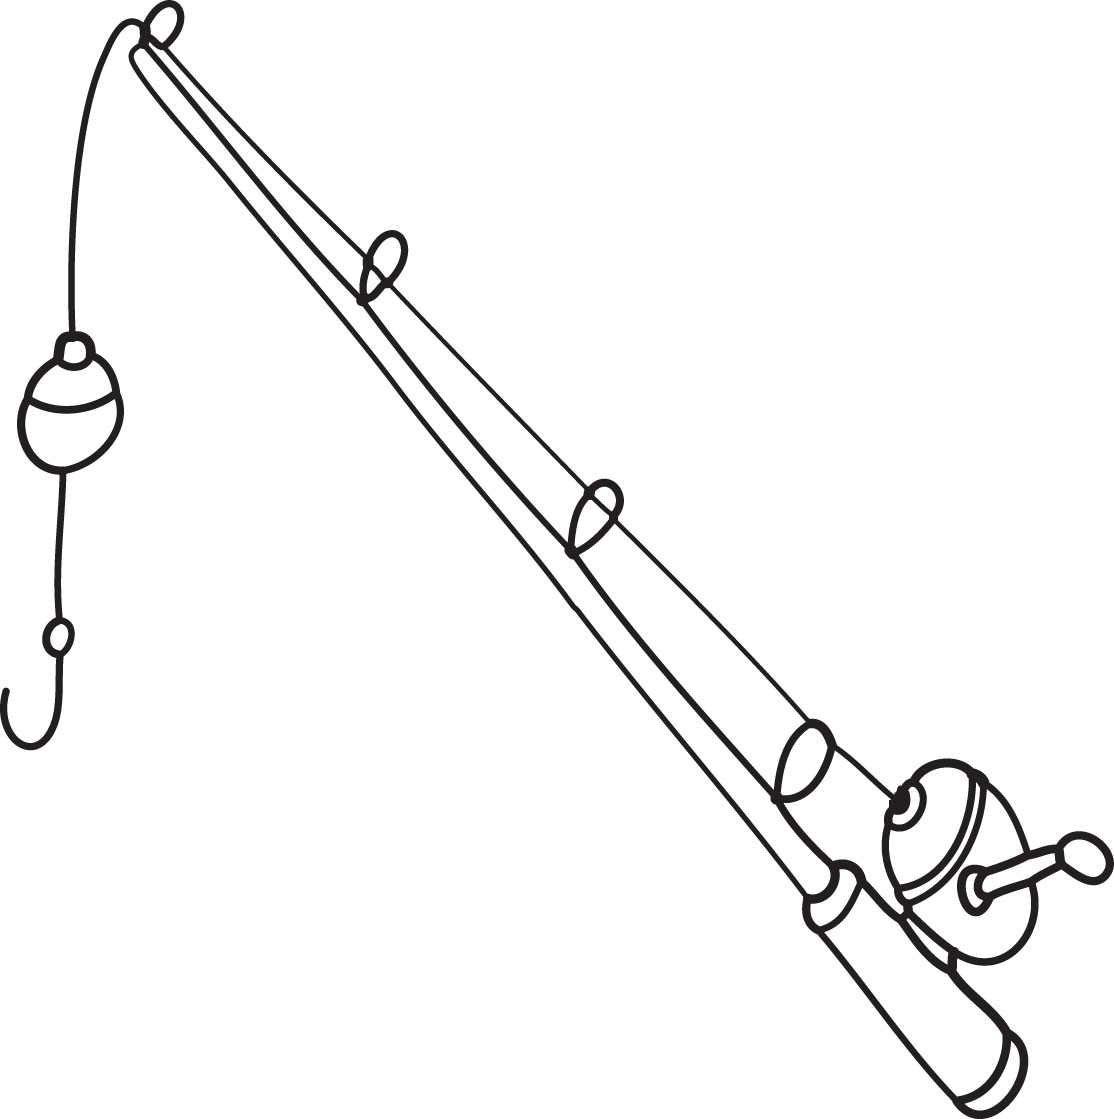 Fishing Pole Clipart | Clipart Panda - Free Clipart Images